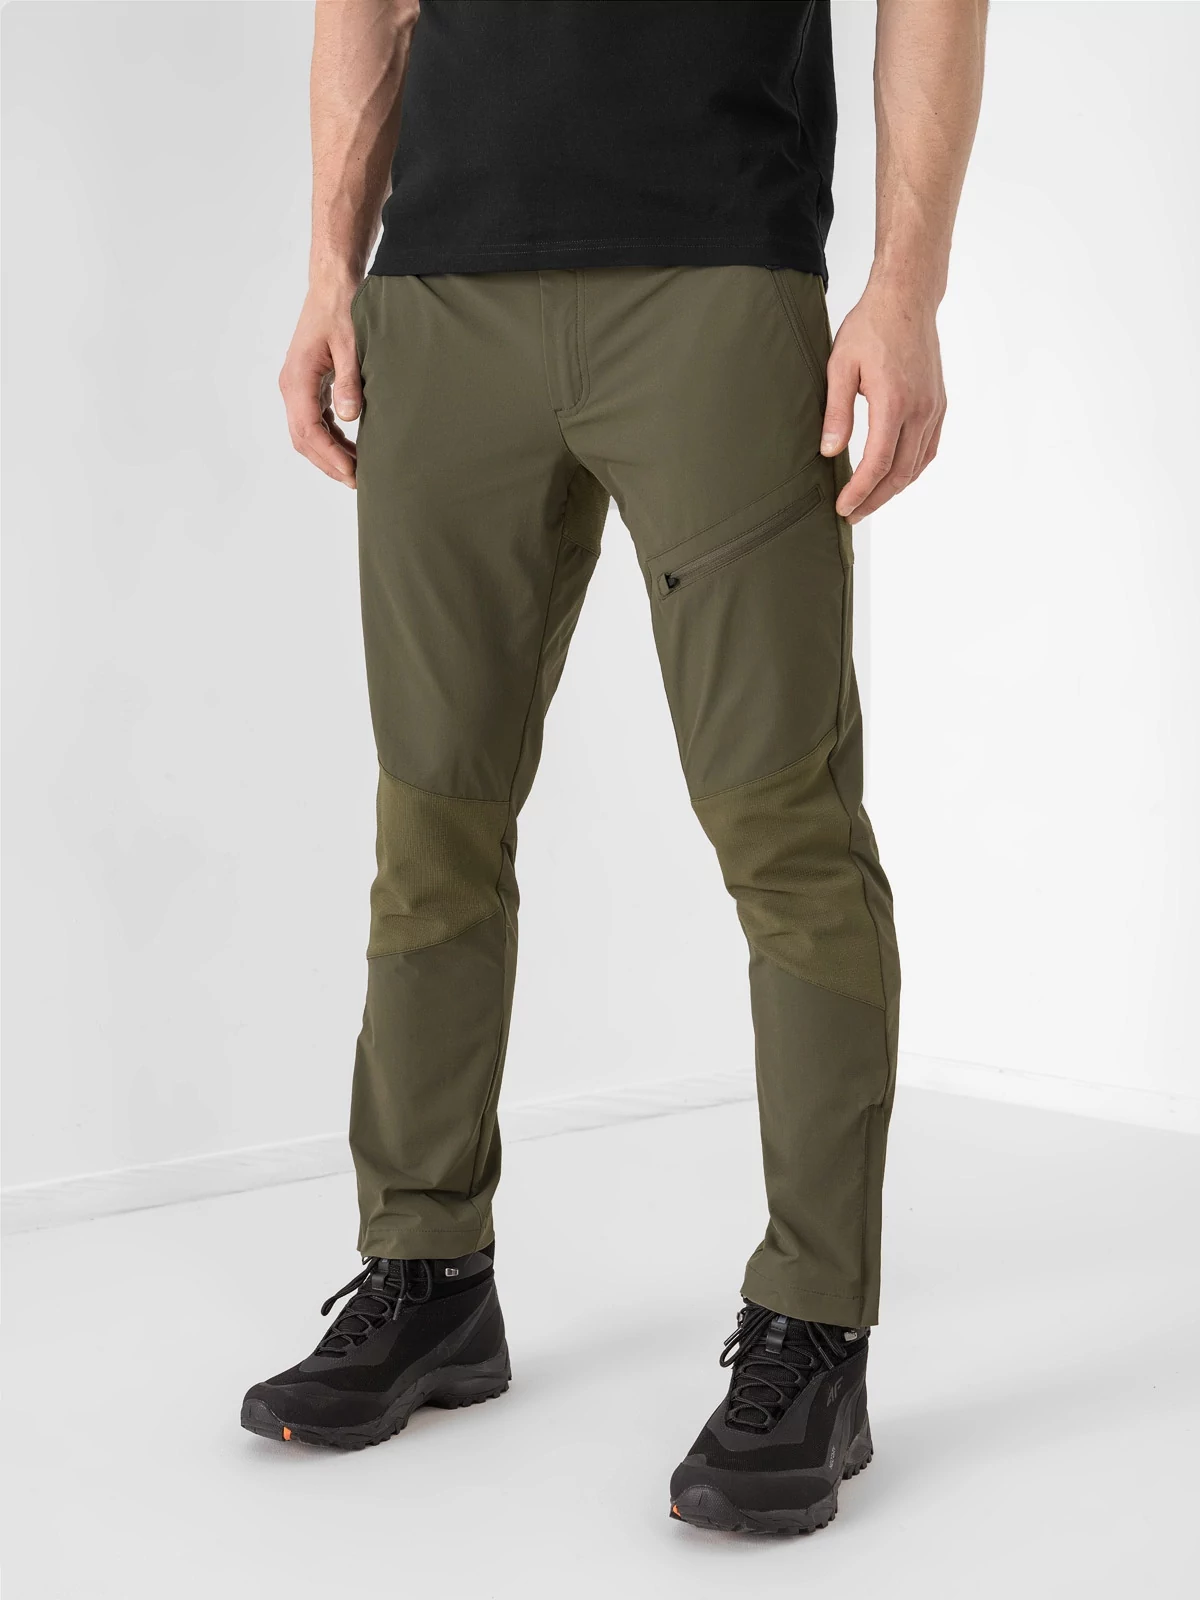 Mens trekking 4Way Stretch trousers colour olivekhaki  4F Sportswear  and shoes